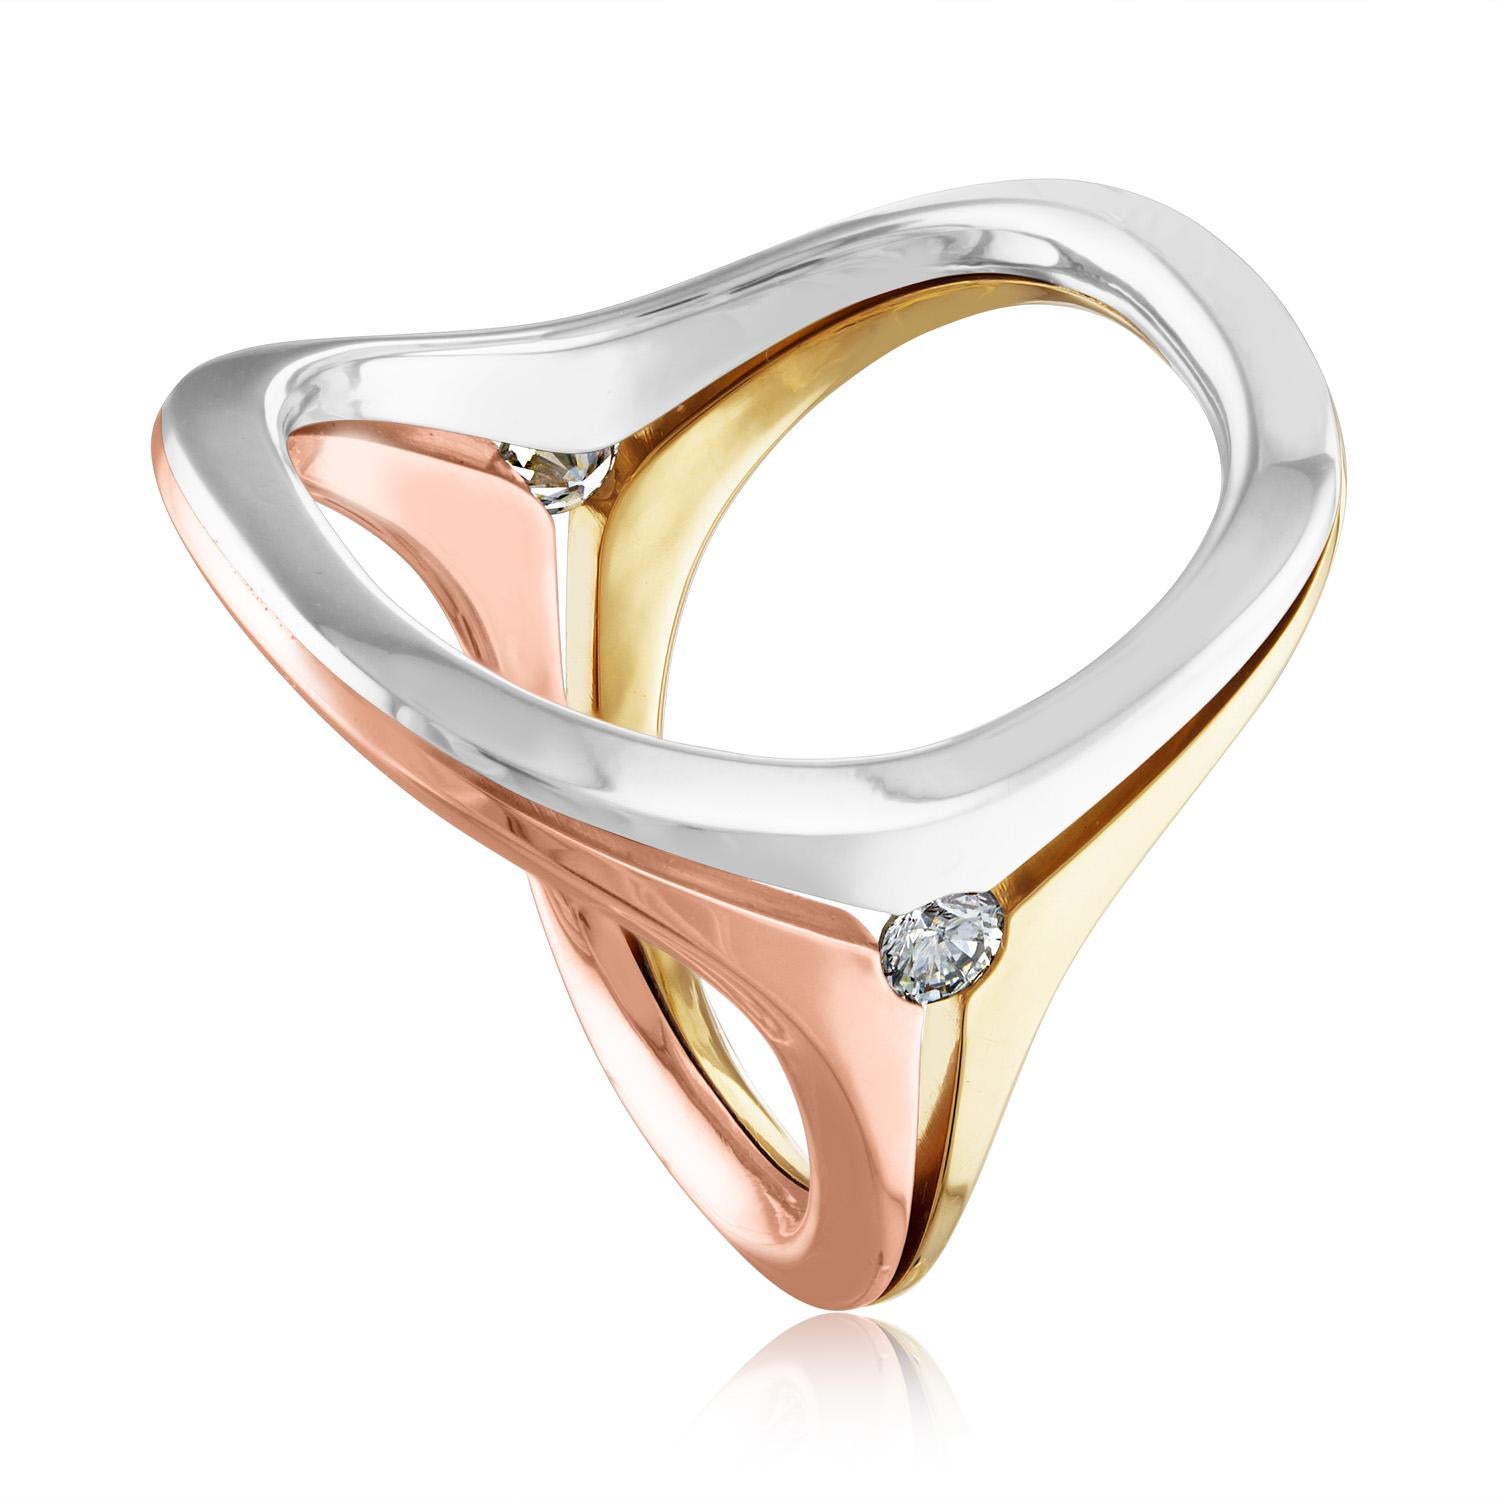 Modernist Tri Color Open Ring
The ring is 18K White Gold, Yellow Gold, Rose Gold
There is 0.20 Carats in diamonds G/H SI
The Modern open design gives the ring a size range.
The ring is a size 7-9, this ring cannot be sized.
It means anyone who wares